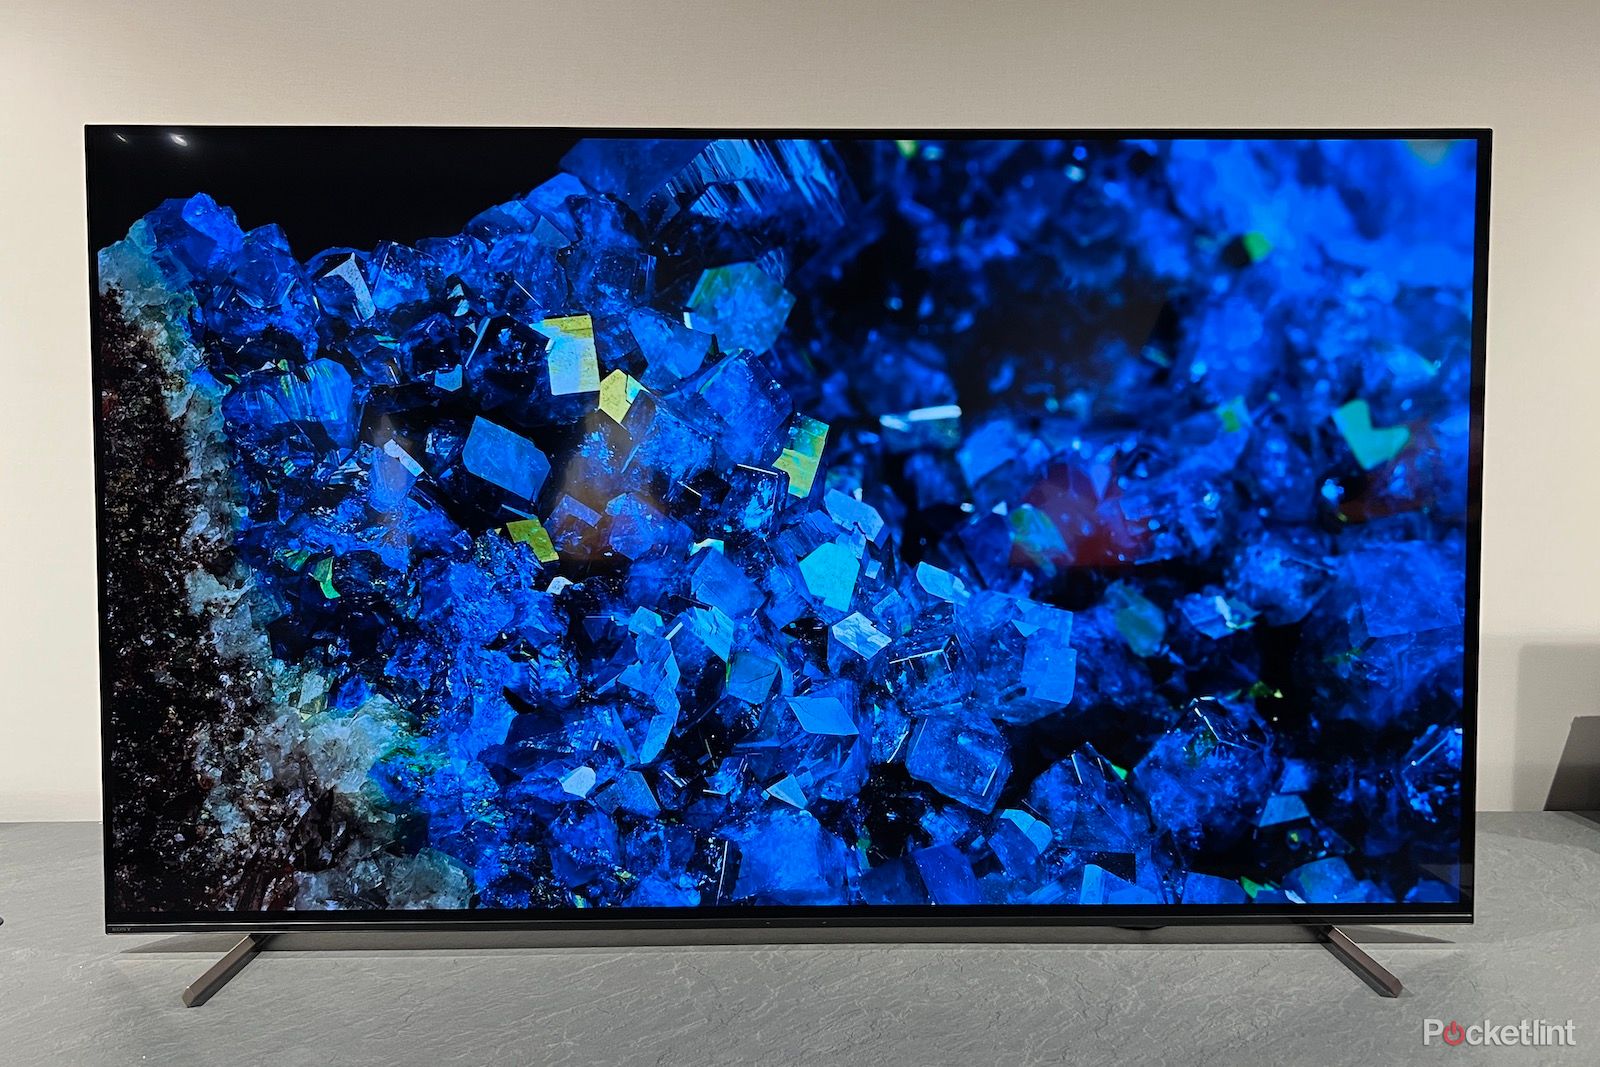 Here's how much Sony's new 8K and QD-OLED Bravia TVs will cost